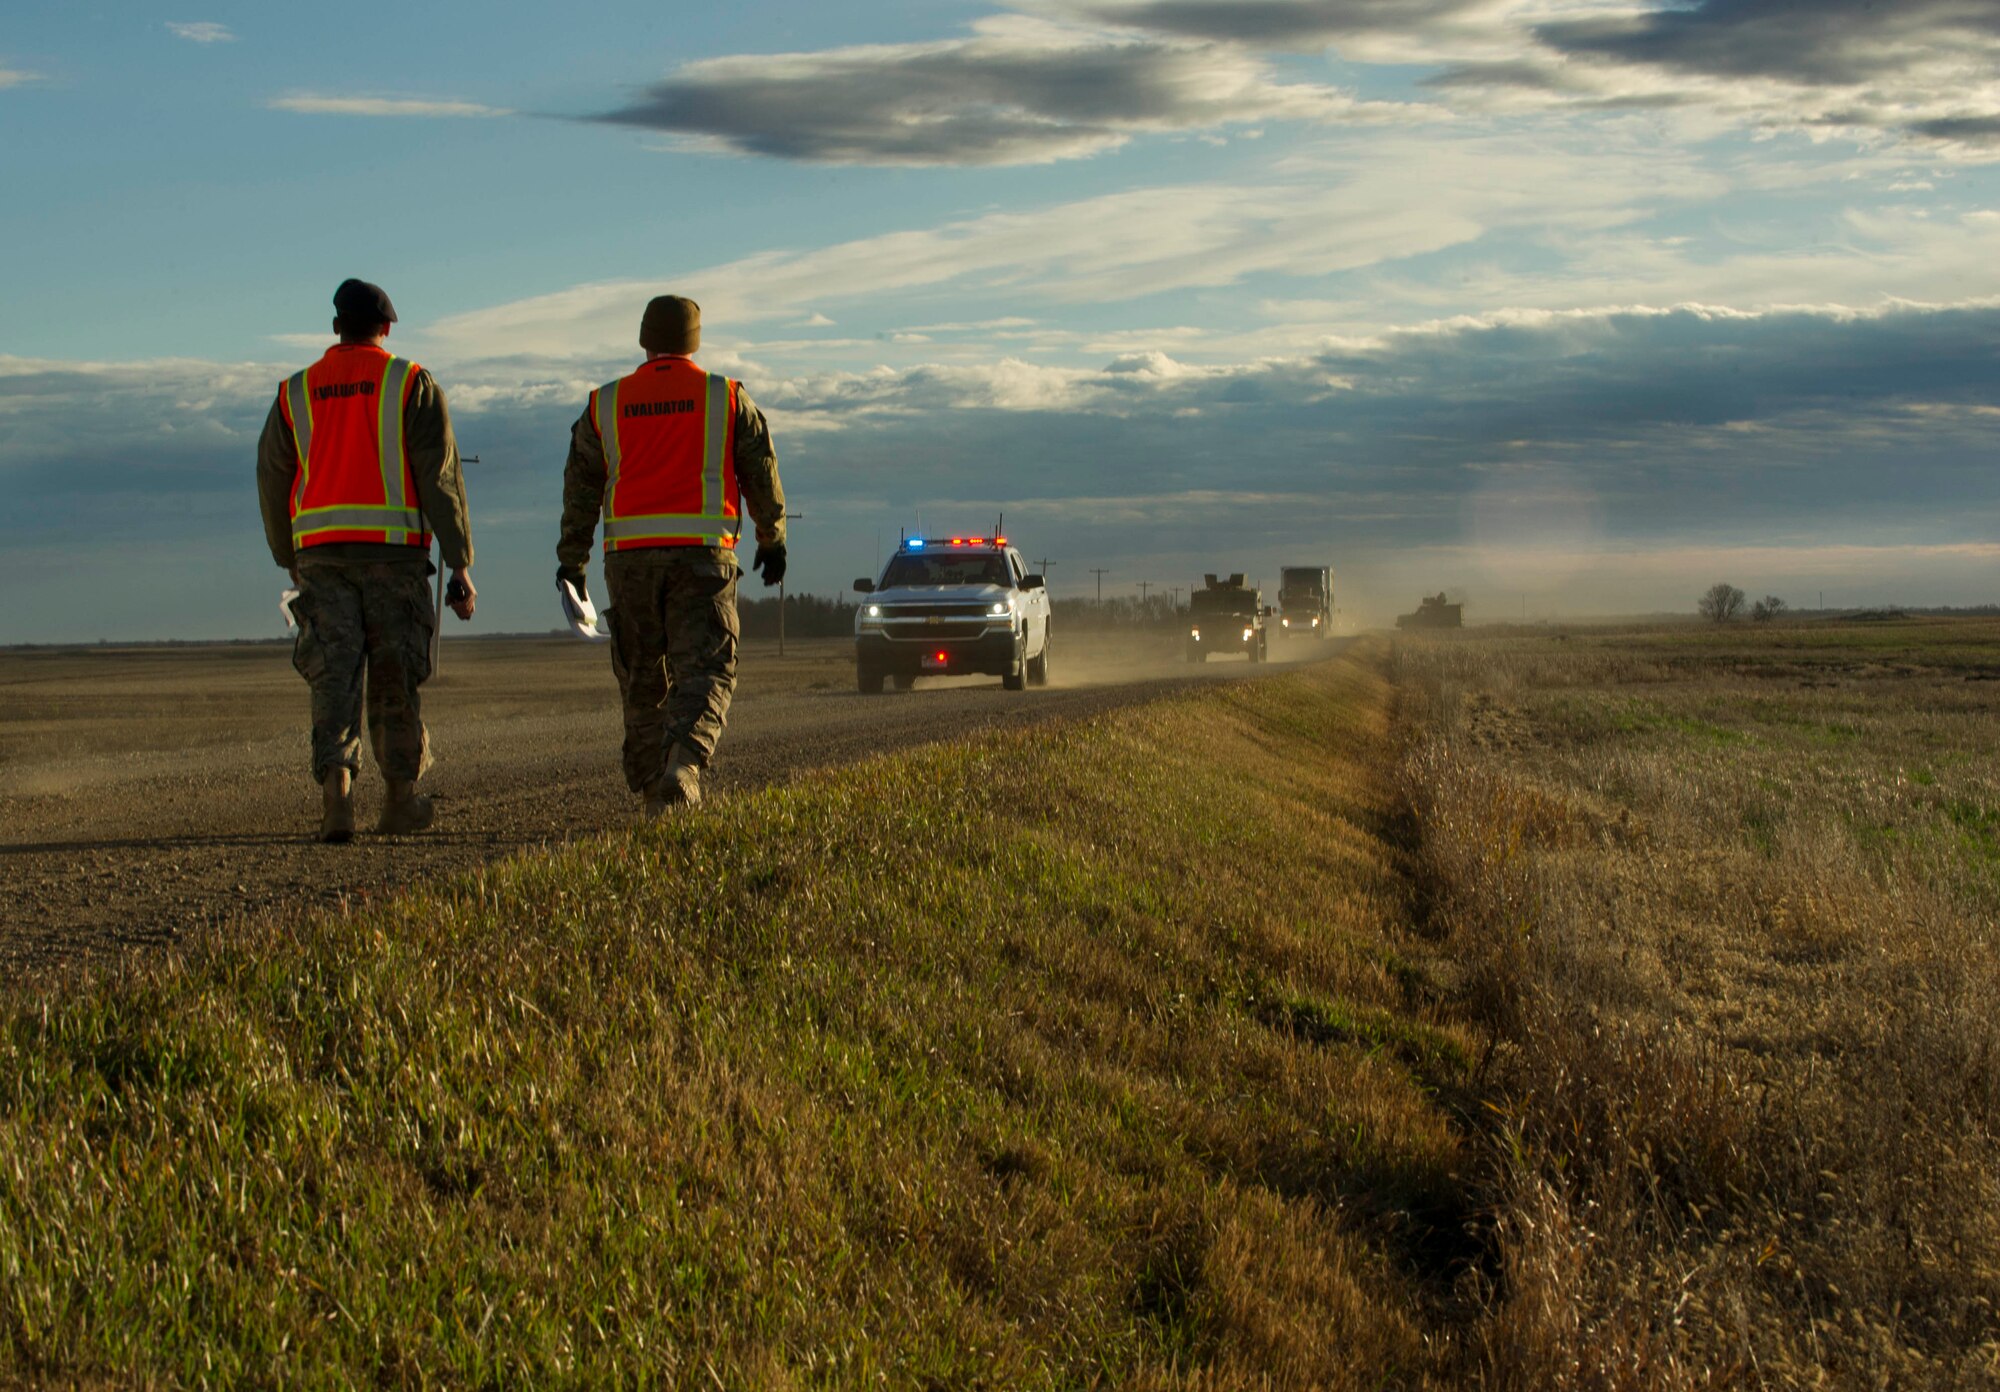 Evaluators walk toward a convoy during a recapture and recovery exercise at the missile complex, N.D., Nov. 16, 2016. Evaluators observed the exercise to ensure all proper procedures were taken during the scenario, which simulated hostile forces taking over a payload transporter. (U.S. Air Force photo/Senior Airman Apryl Hall)